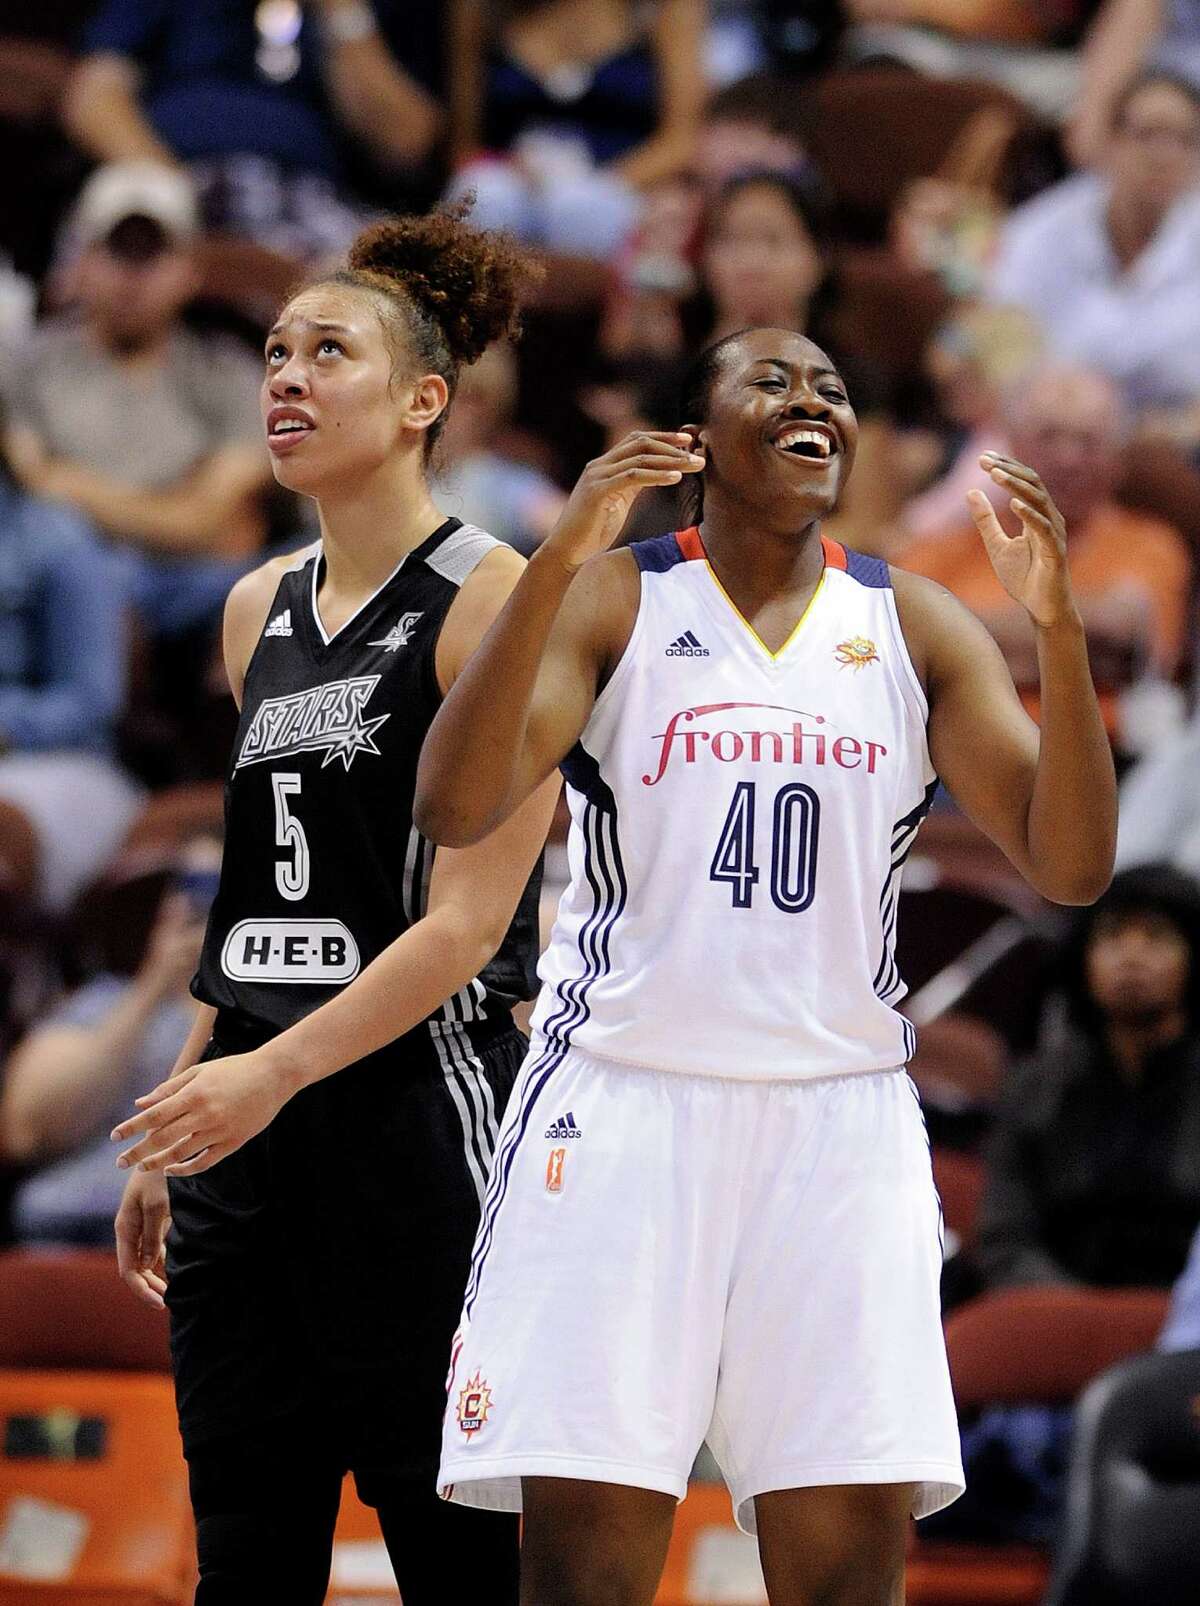 Connecticut Sun’s Shekinna Stricklan (40) reacts to a call as San Antonio Stars’s Dearica Hamby (5) looks at the scoreboard late in the second half of Connecticut’s 82-51 victory in a WNBA basketball game in Uncasville, Conn., on Tuesday, Aug. 4, 2015.